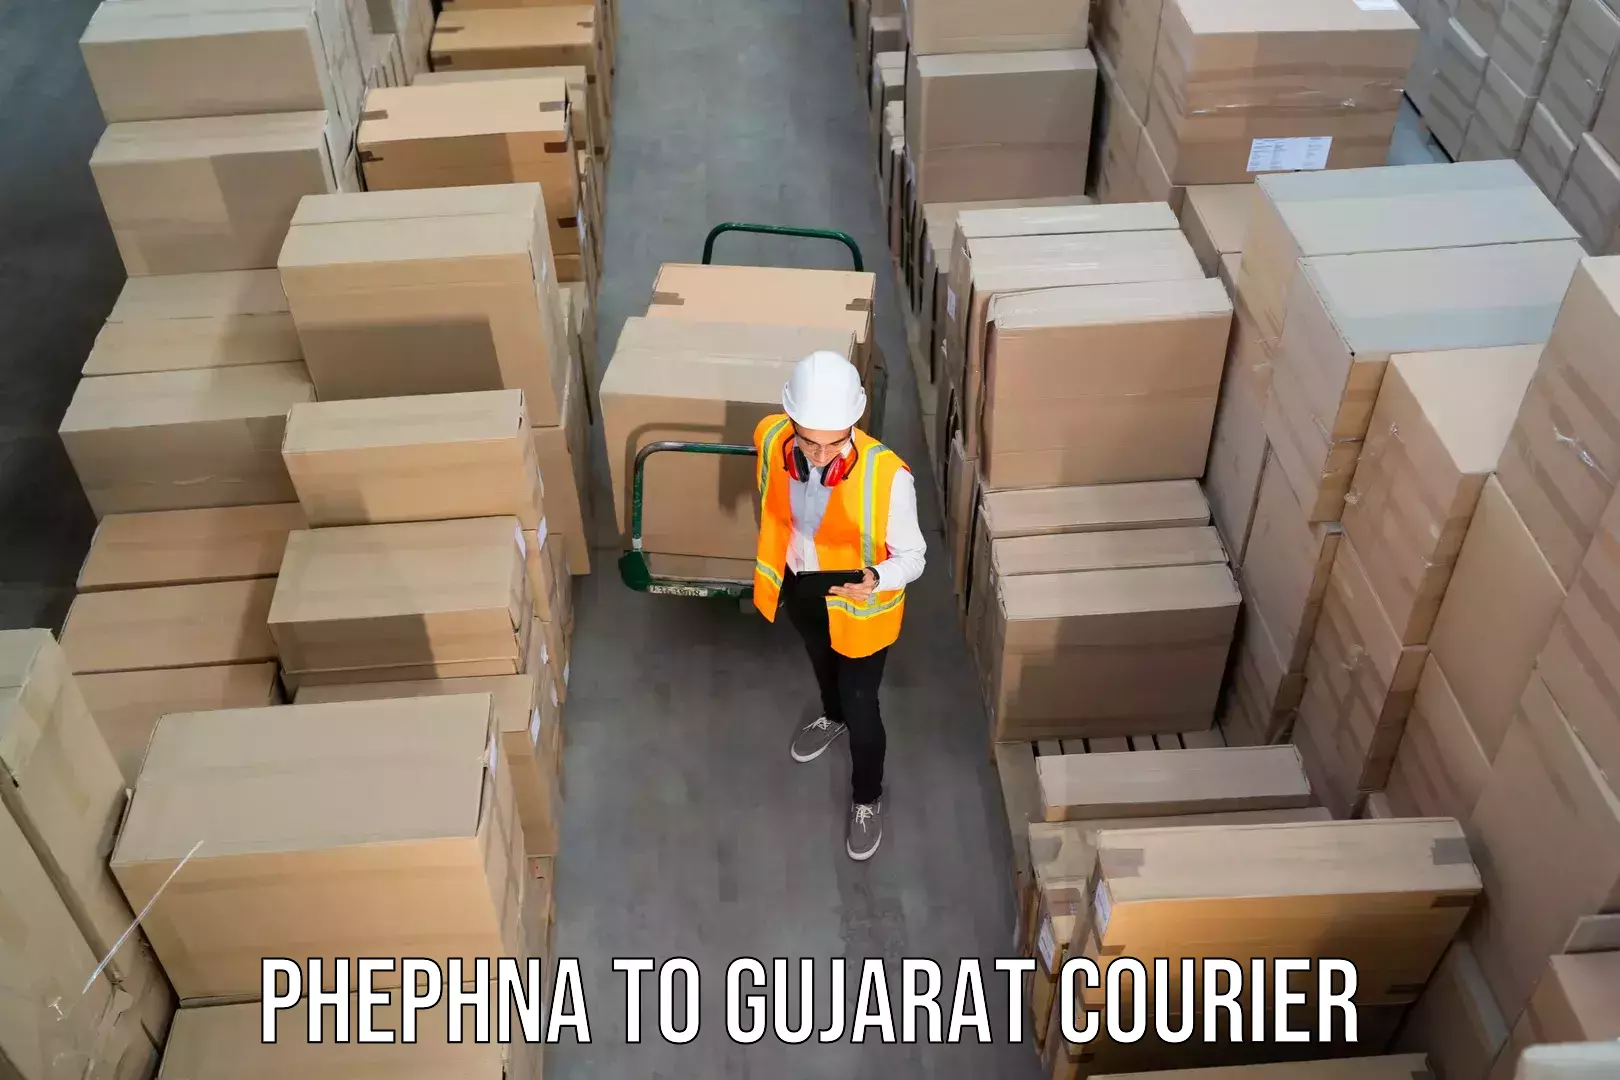 Advanced tracking systems Phephna to Kheda